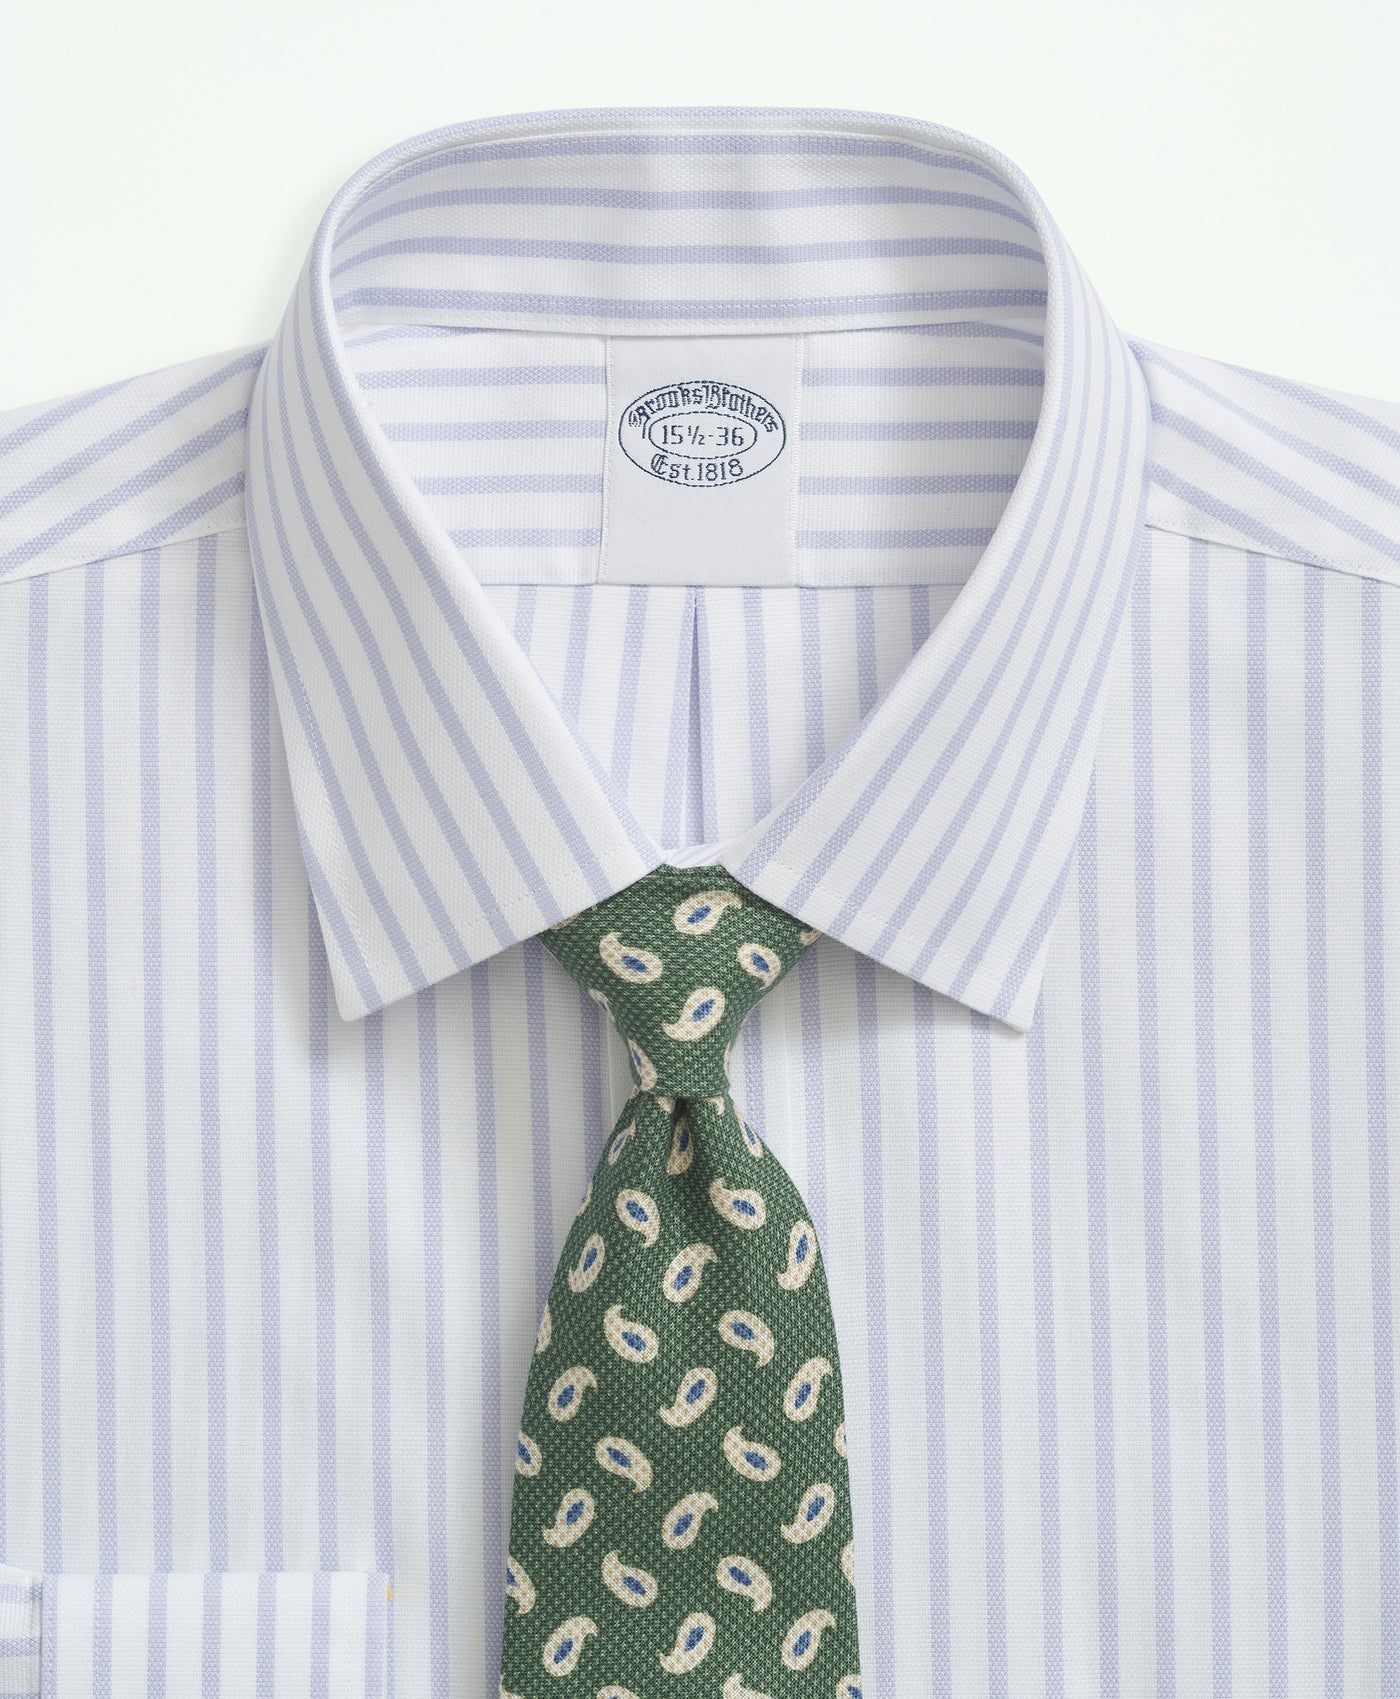 Stretch Slim-Fit Dress Shirt, Non-Iron Royal Oxford Ainsley Collar, Bengal Stripe - Brooks Brothers Canada